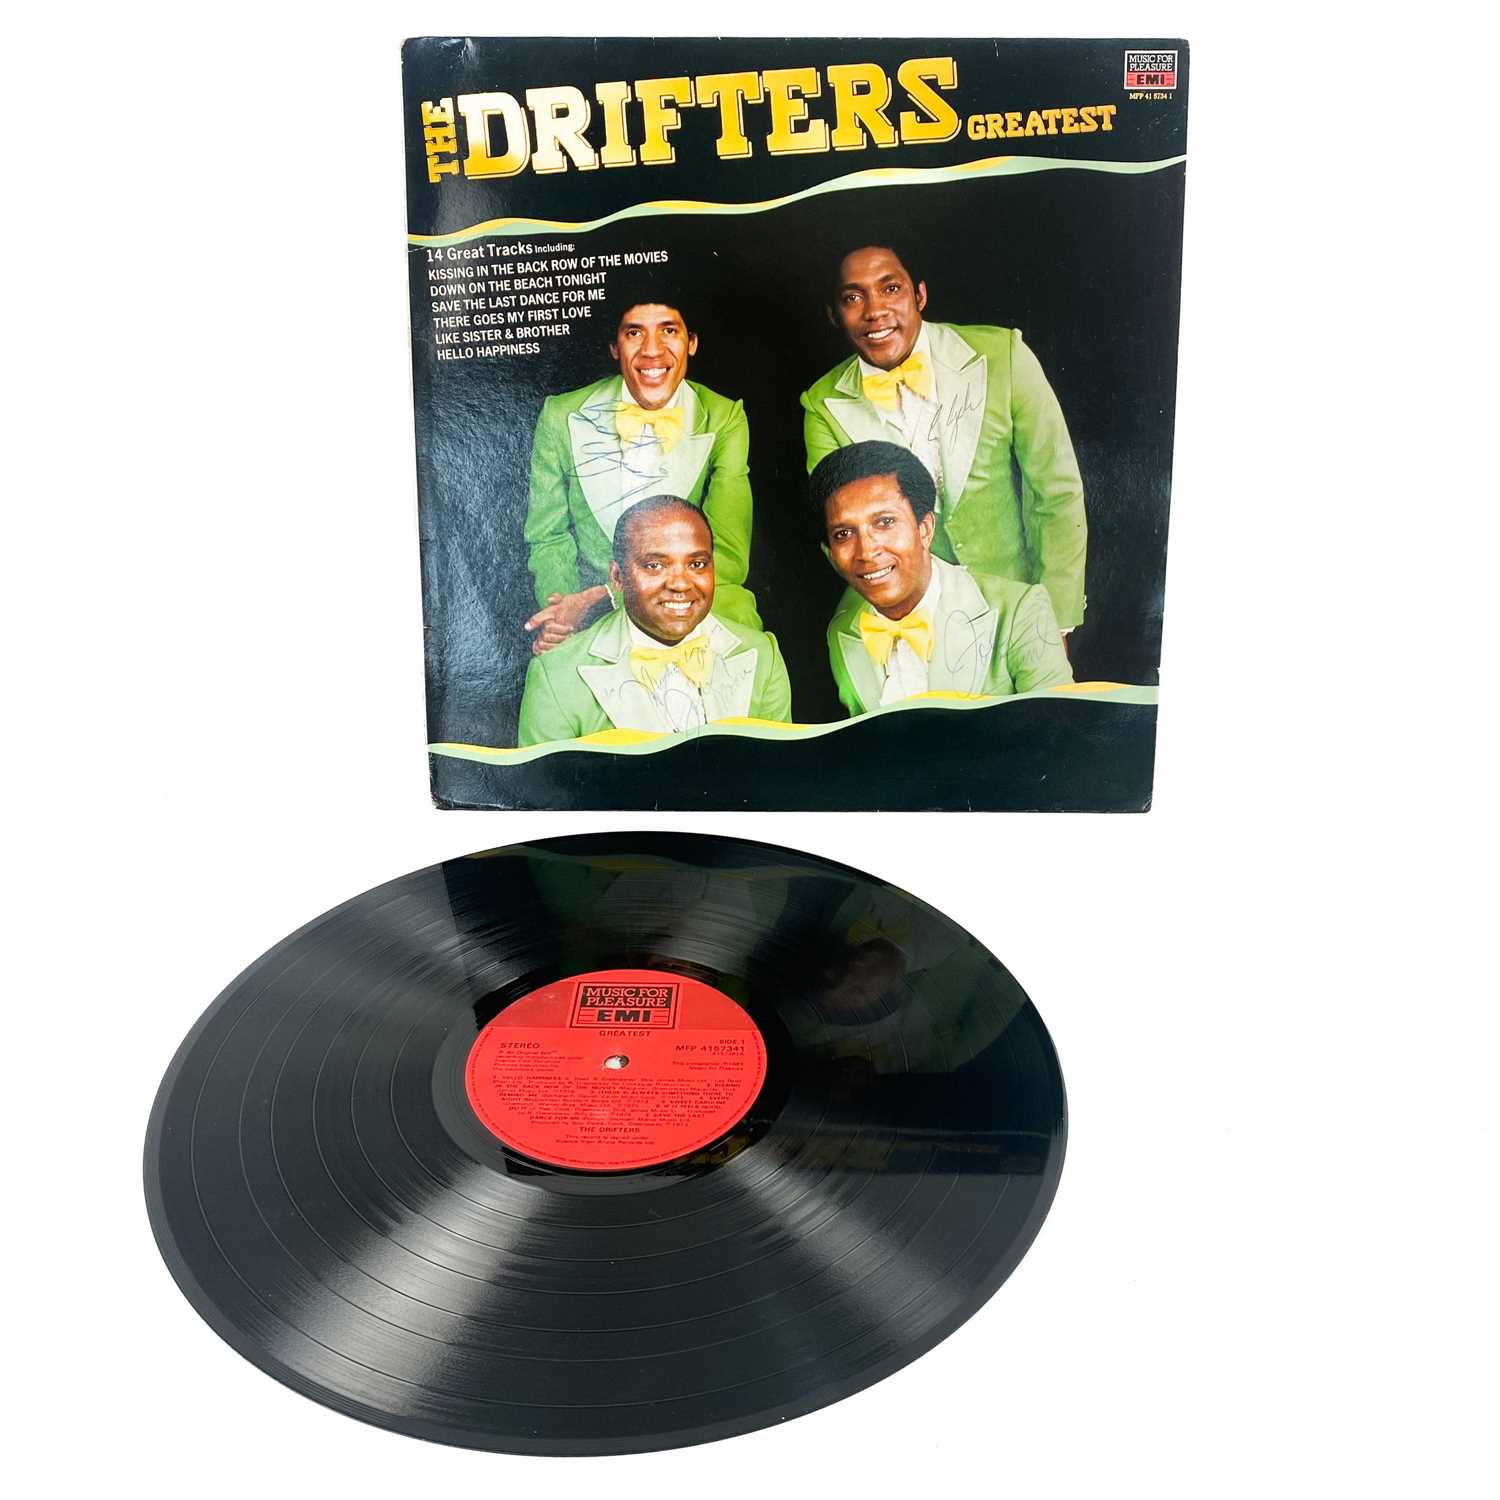 Signed; The Drifters - Image 7 of 11